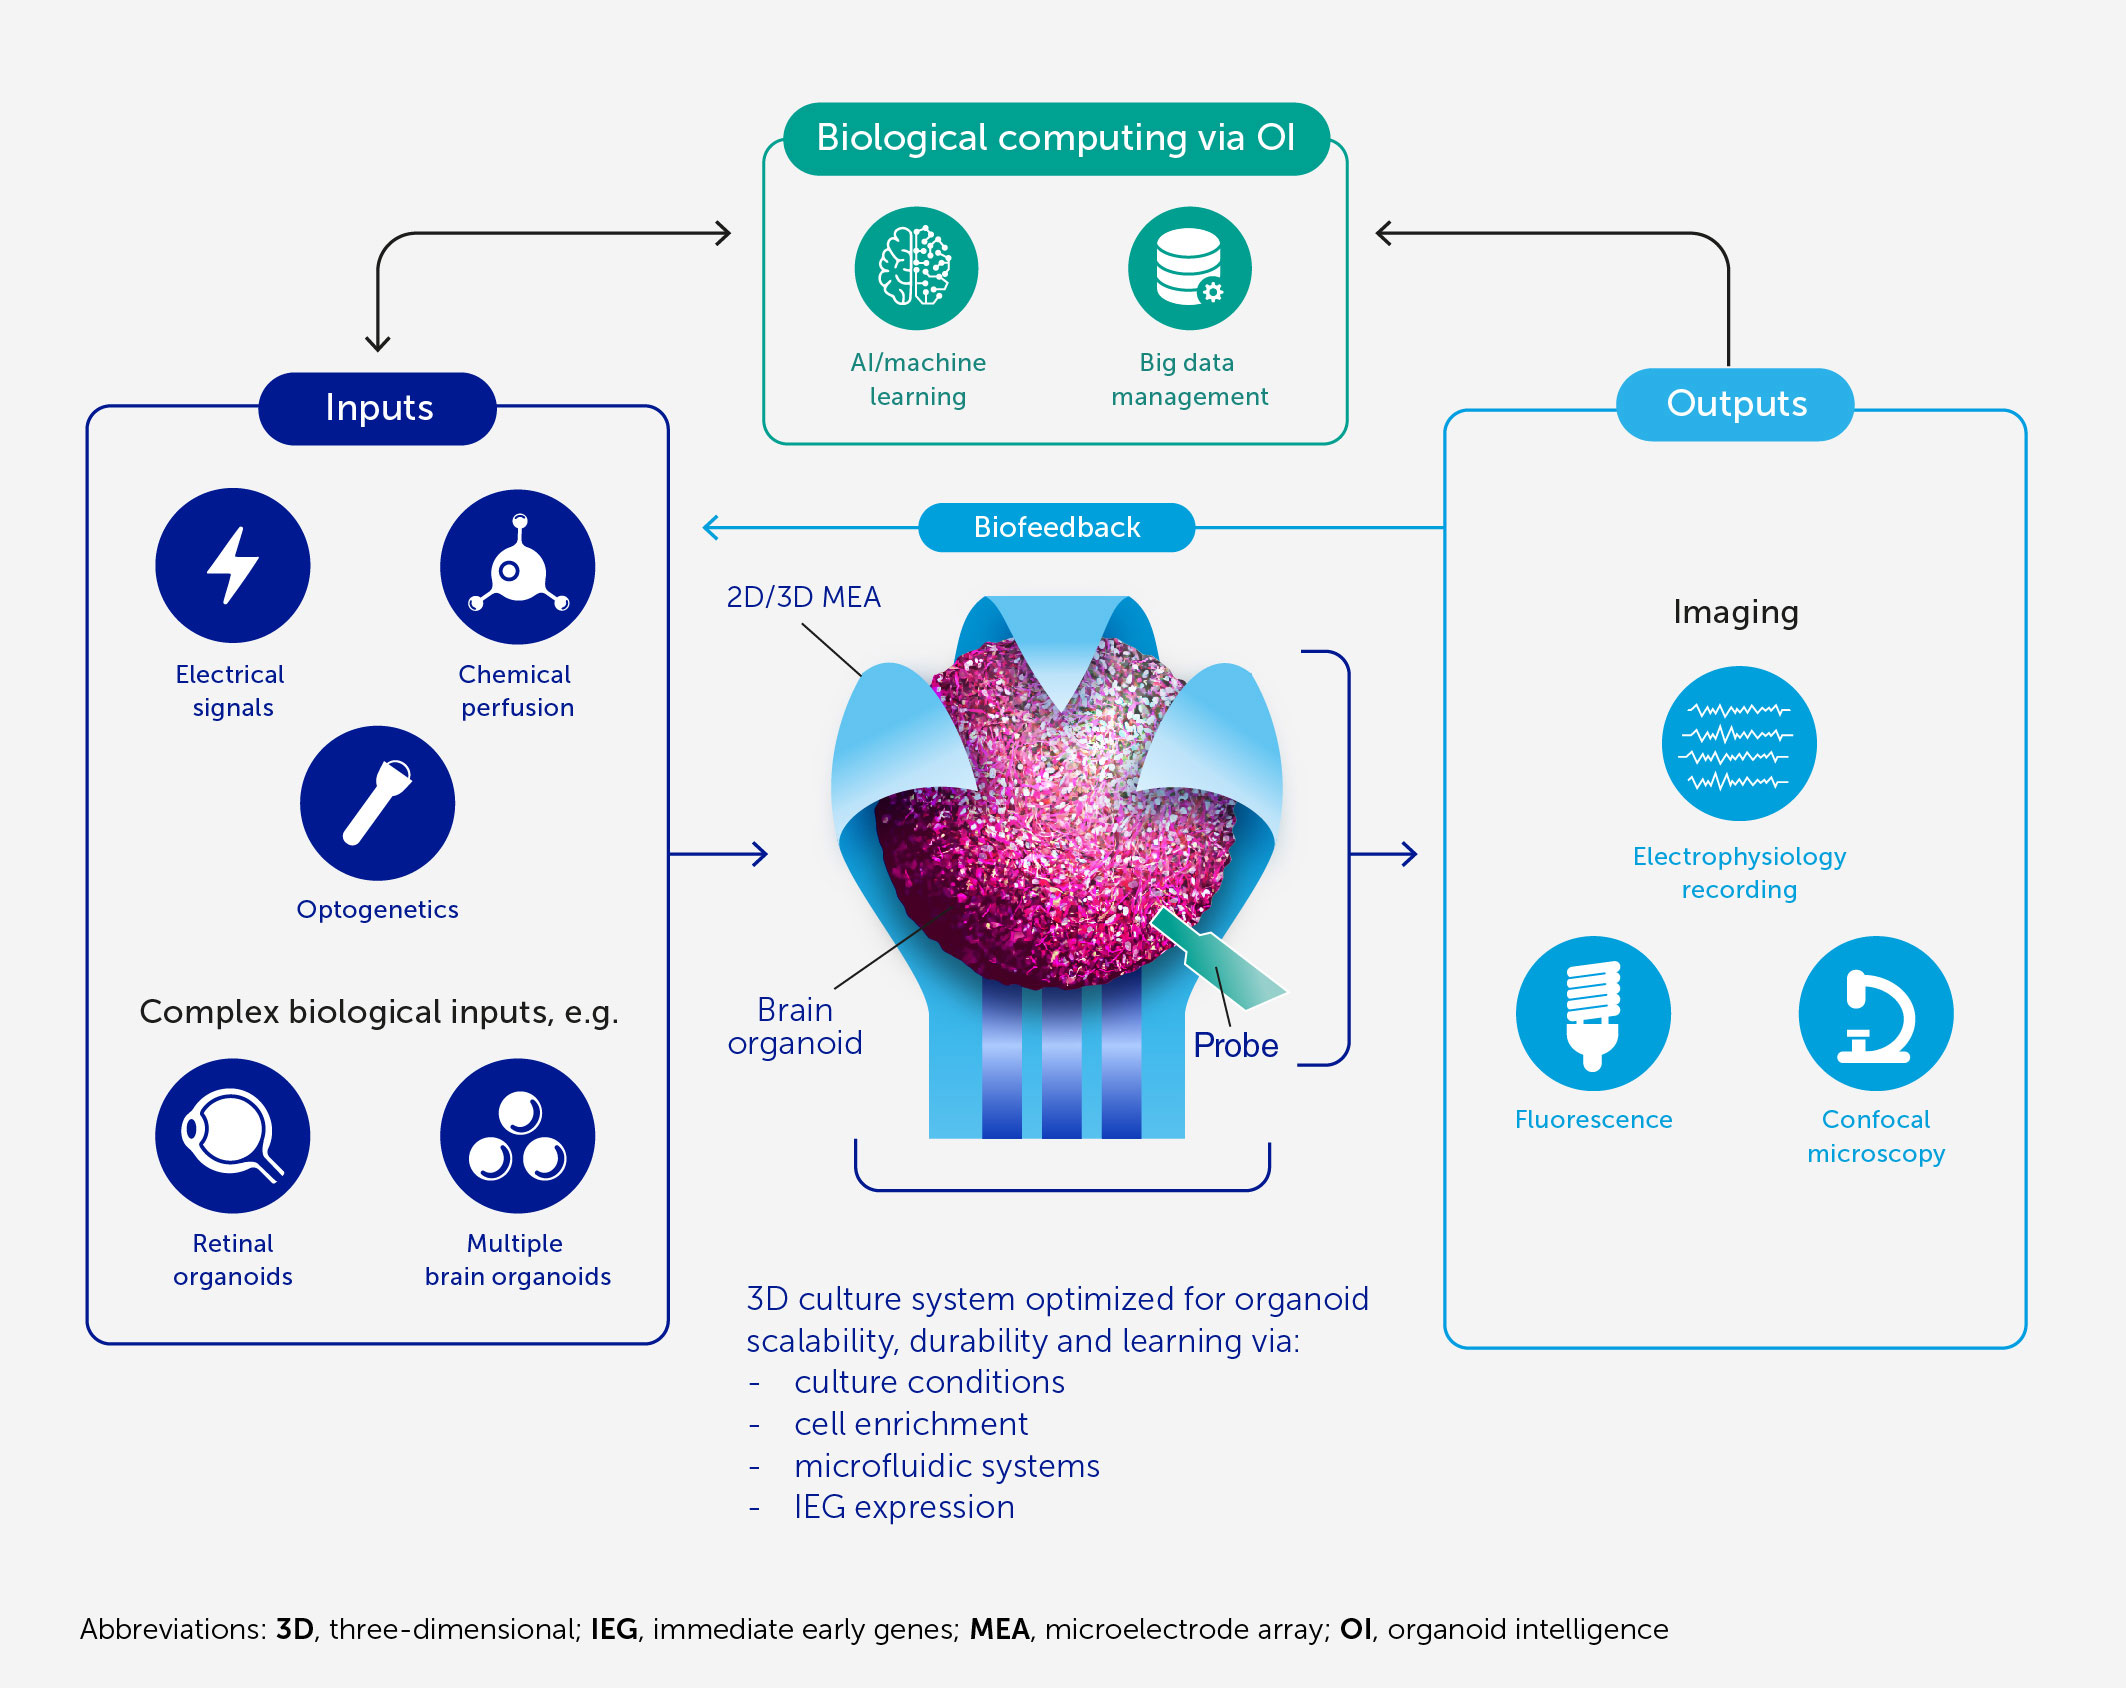 Frontiers  Organoid intelligence (OI): the new frontier in